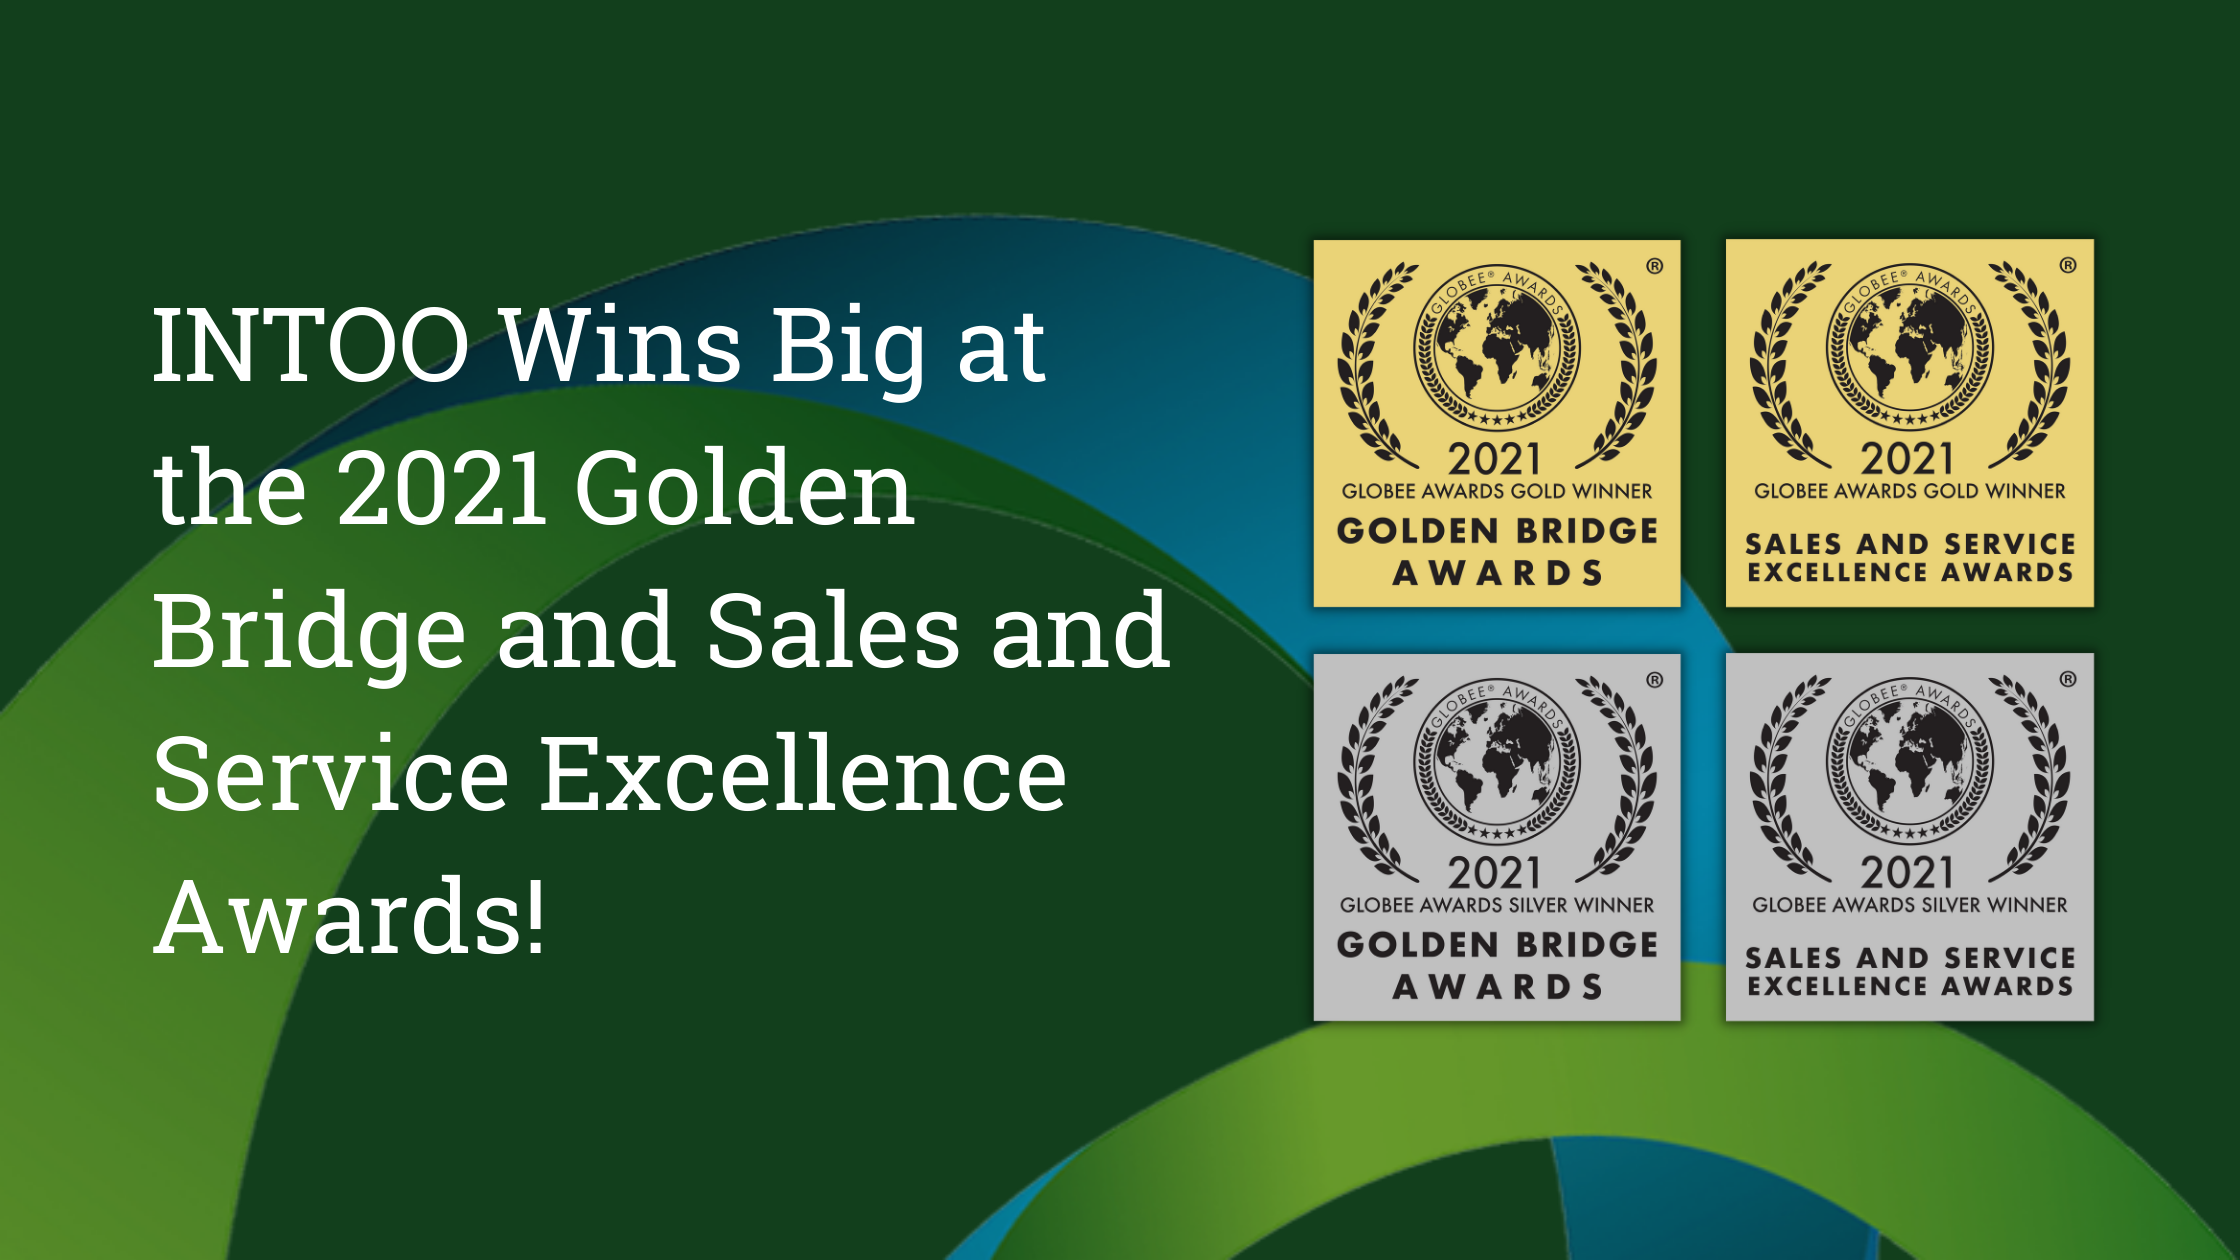 INTOO Wins Big at the 2021 Golden Bridge and Sales and Service Excellence Awards!